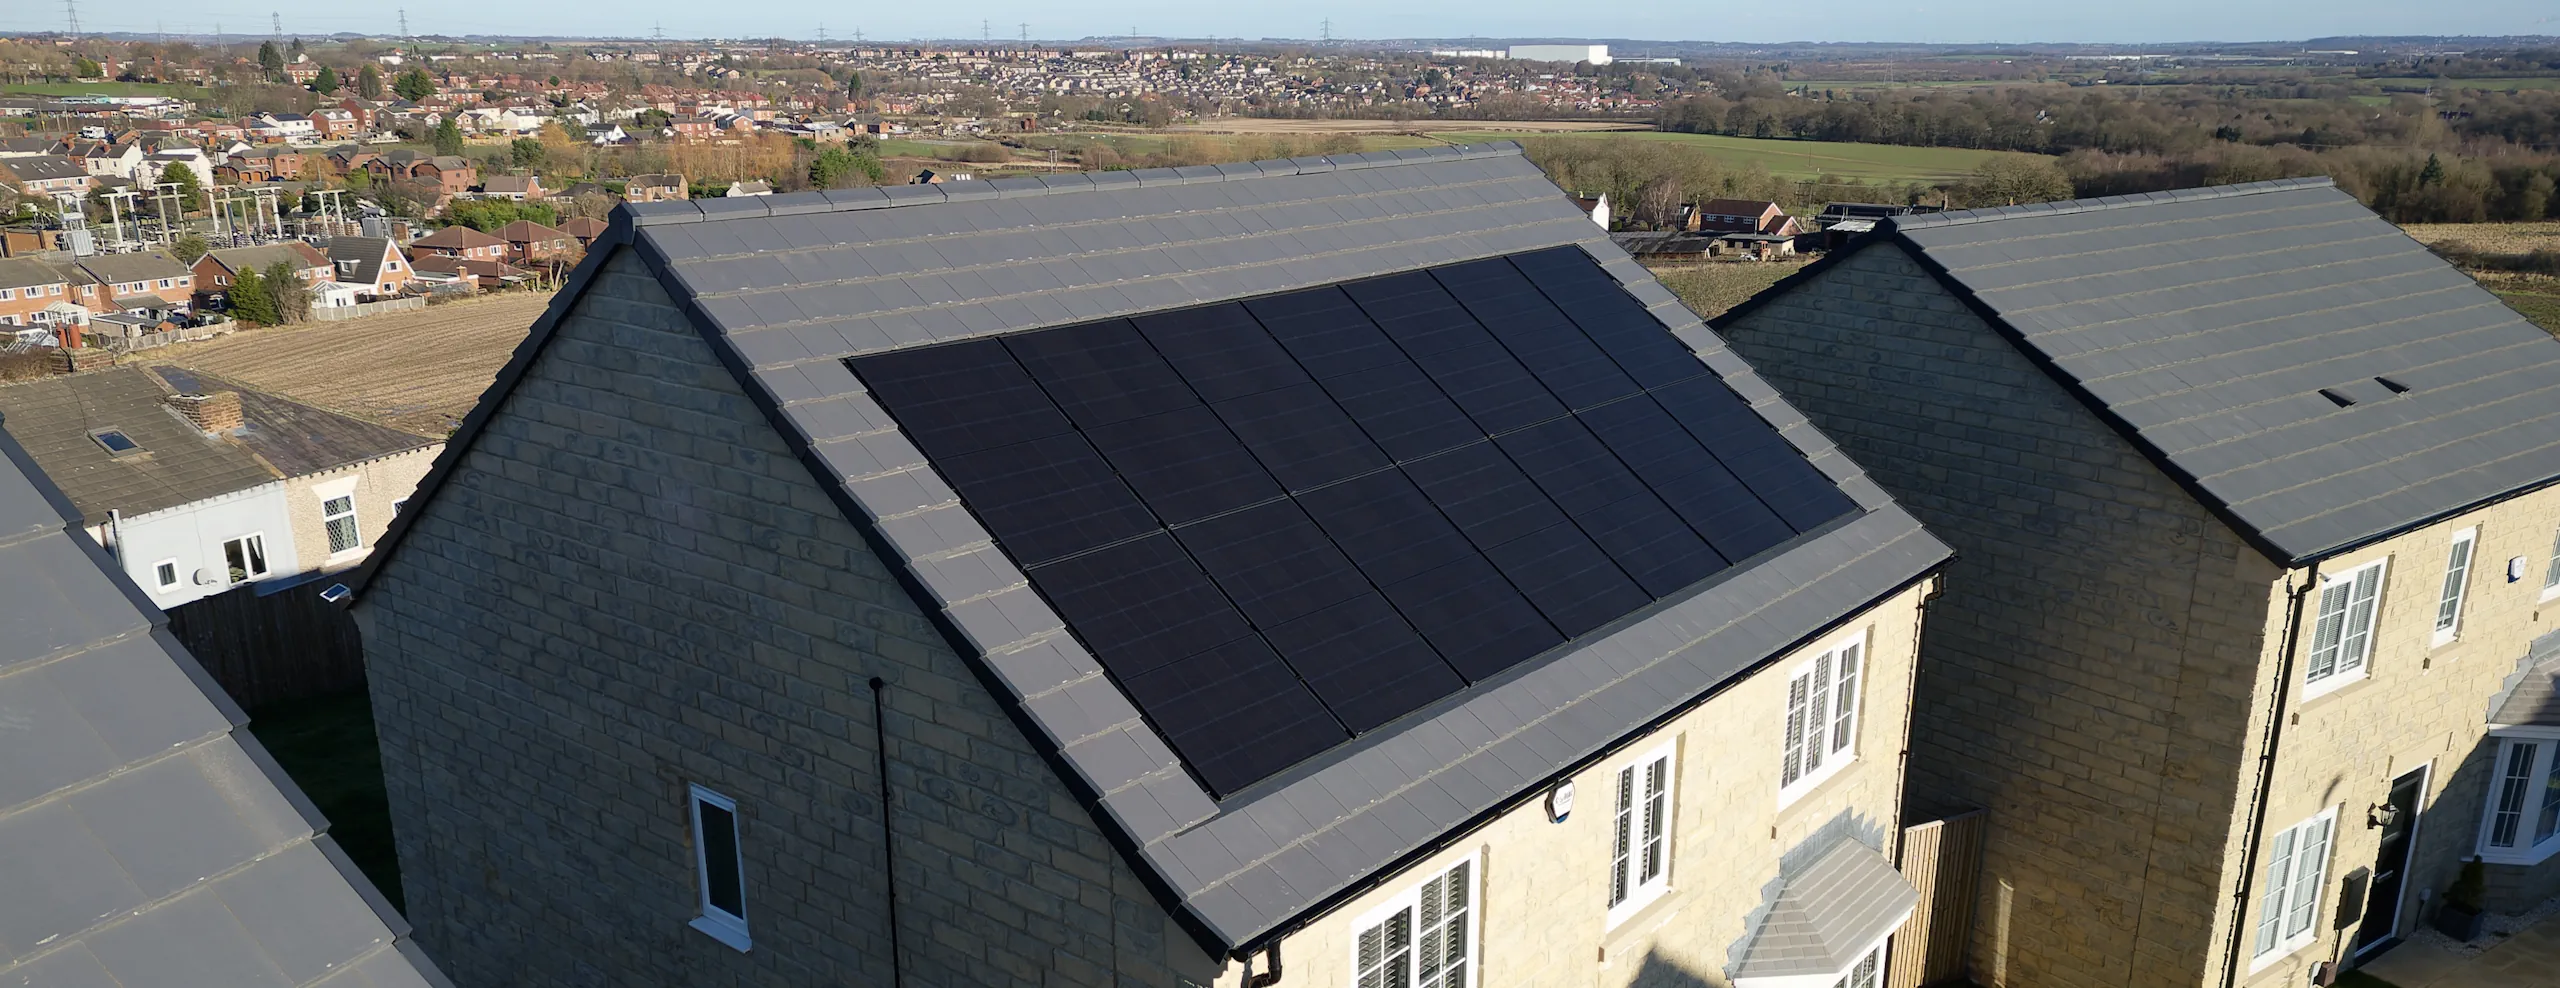 In Roof Solar Panels In Yorkshire